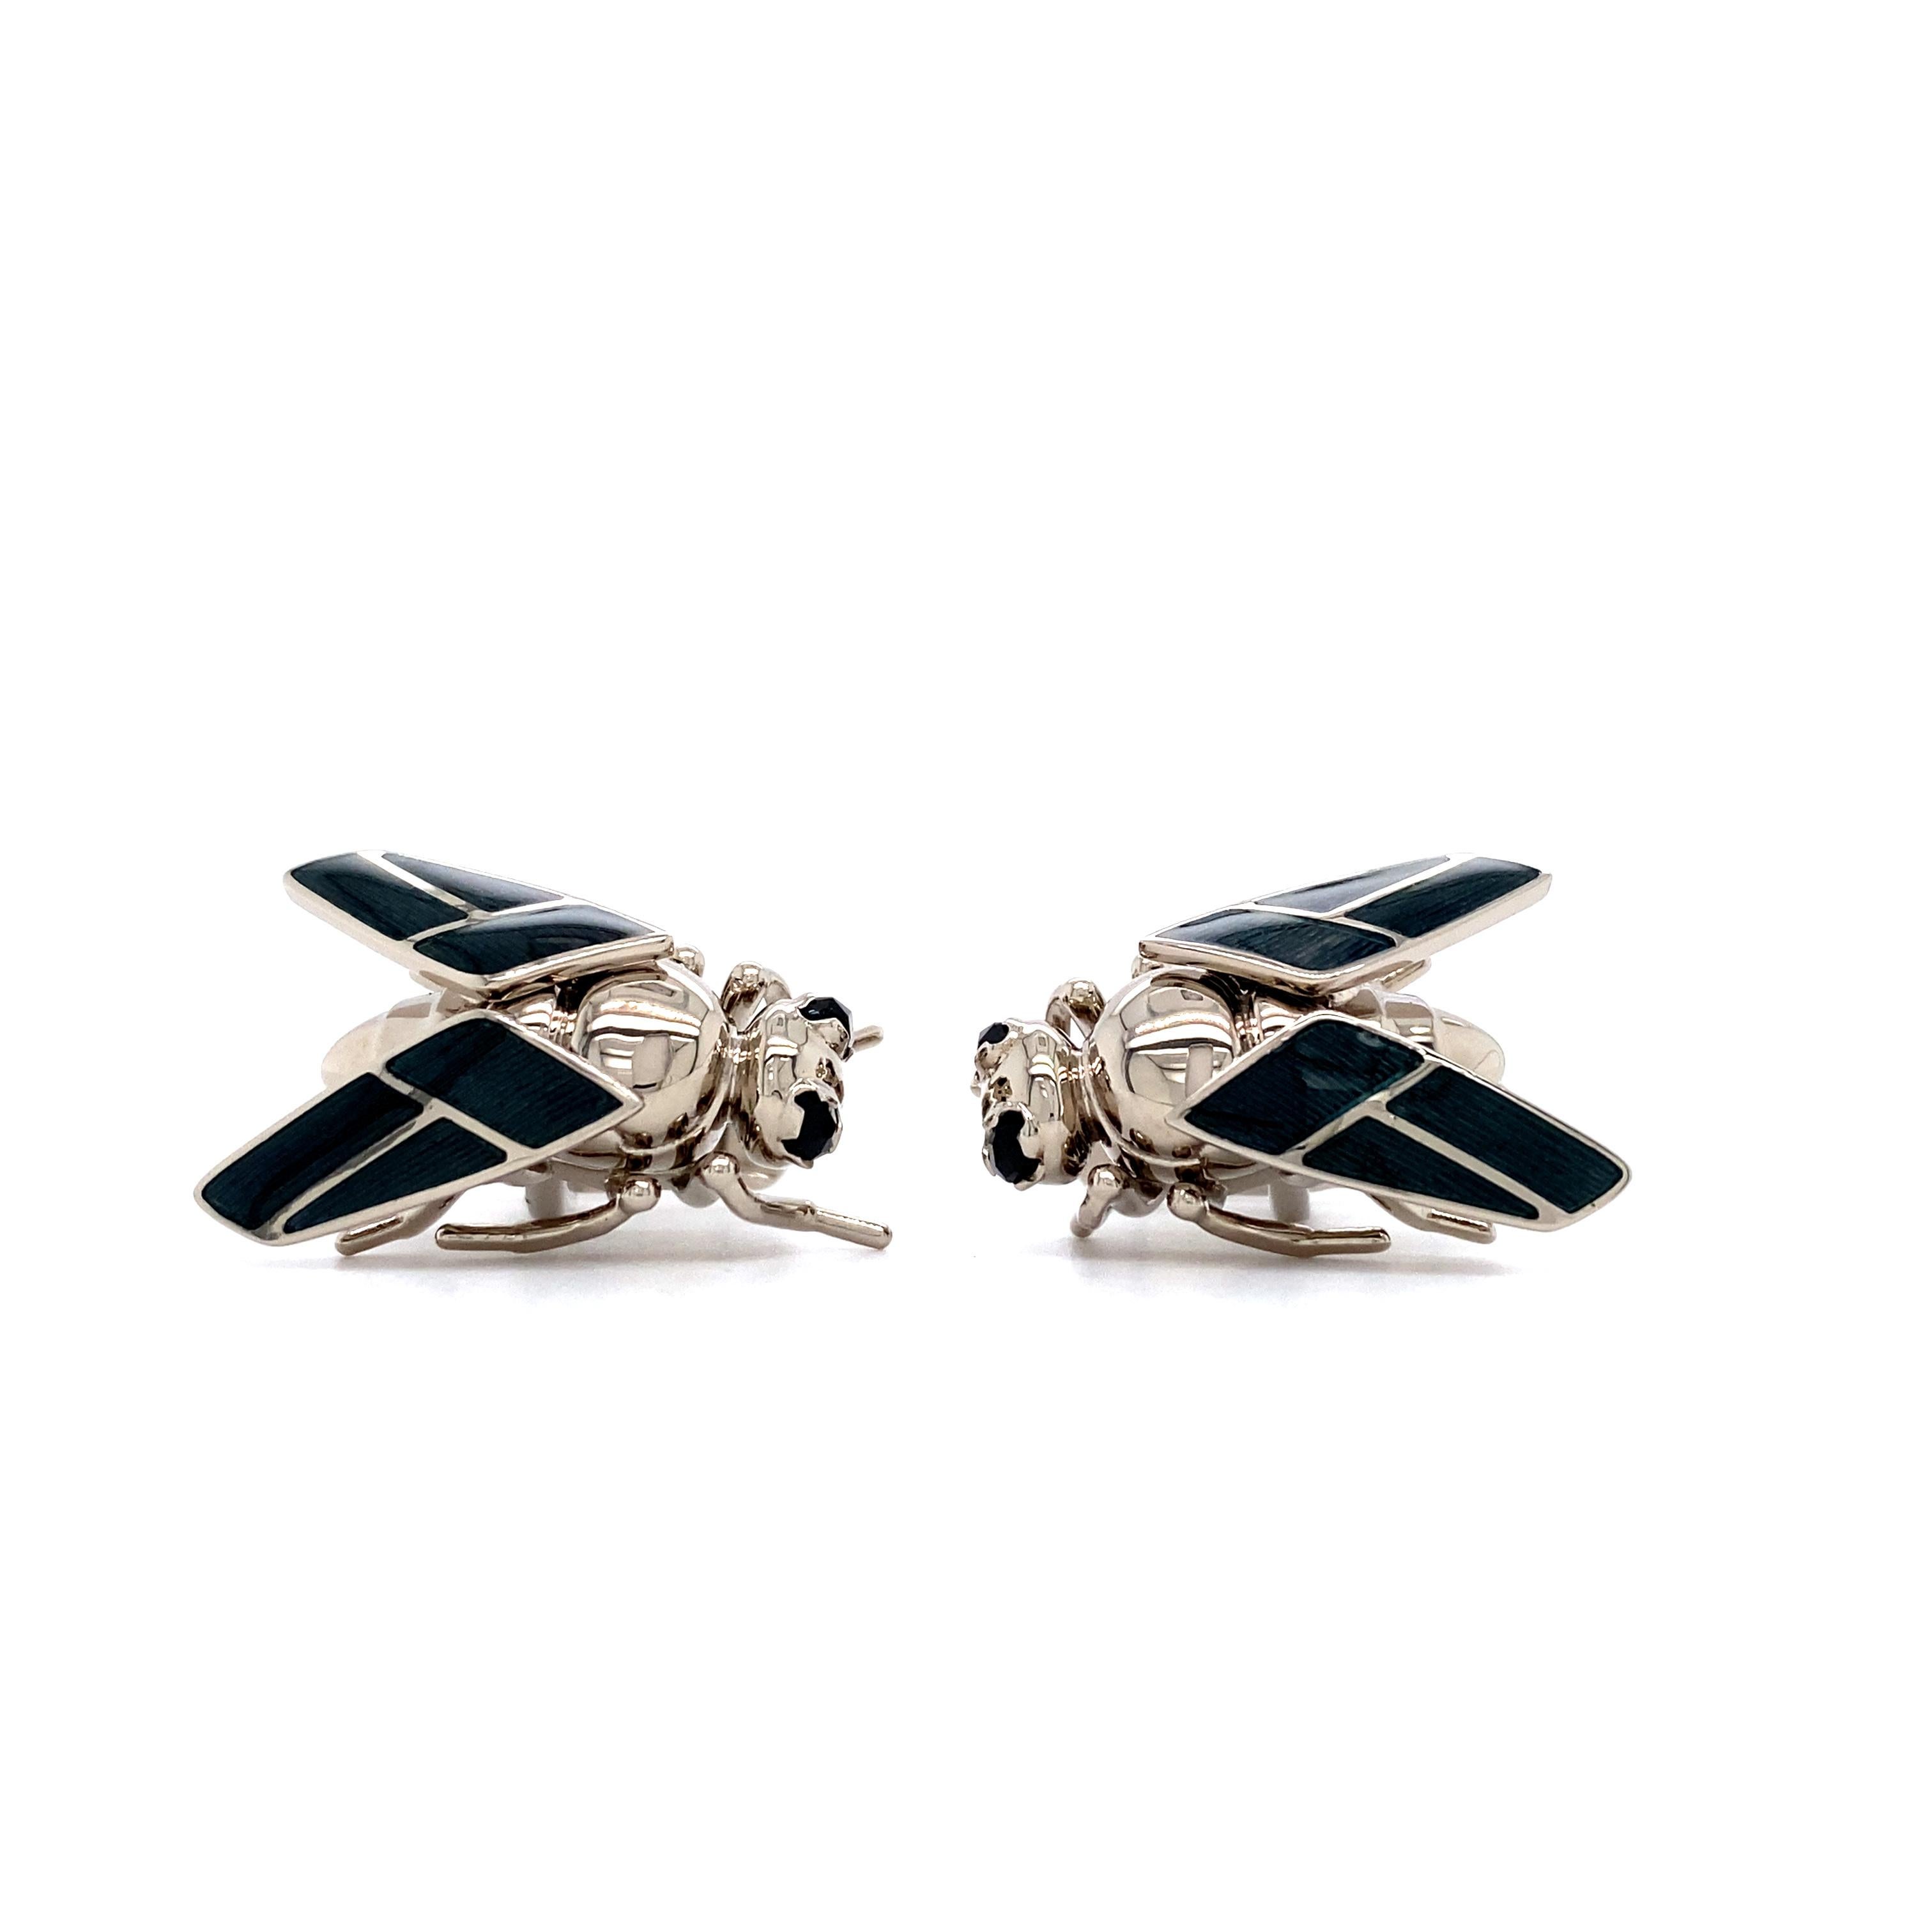 Victor Mayer fly cufflinks, 18k white gold, grey vitreous enamel, black tourmaline eyes

These cufflinks look deceptively similar to a real house fly. So an accessory for men with a sense of humor and a real attitude. 

About the creator Victor